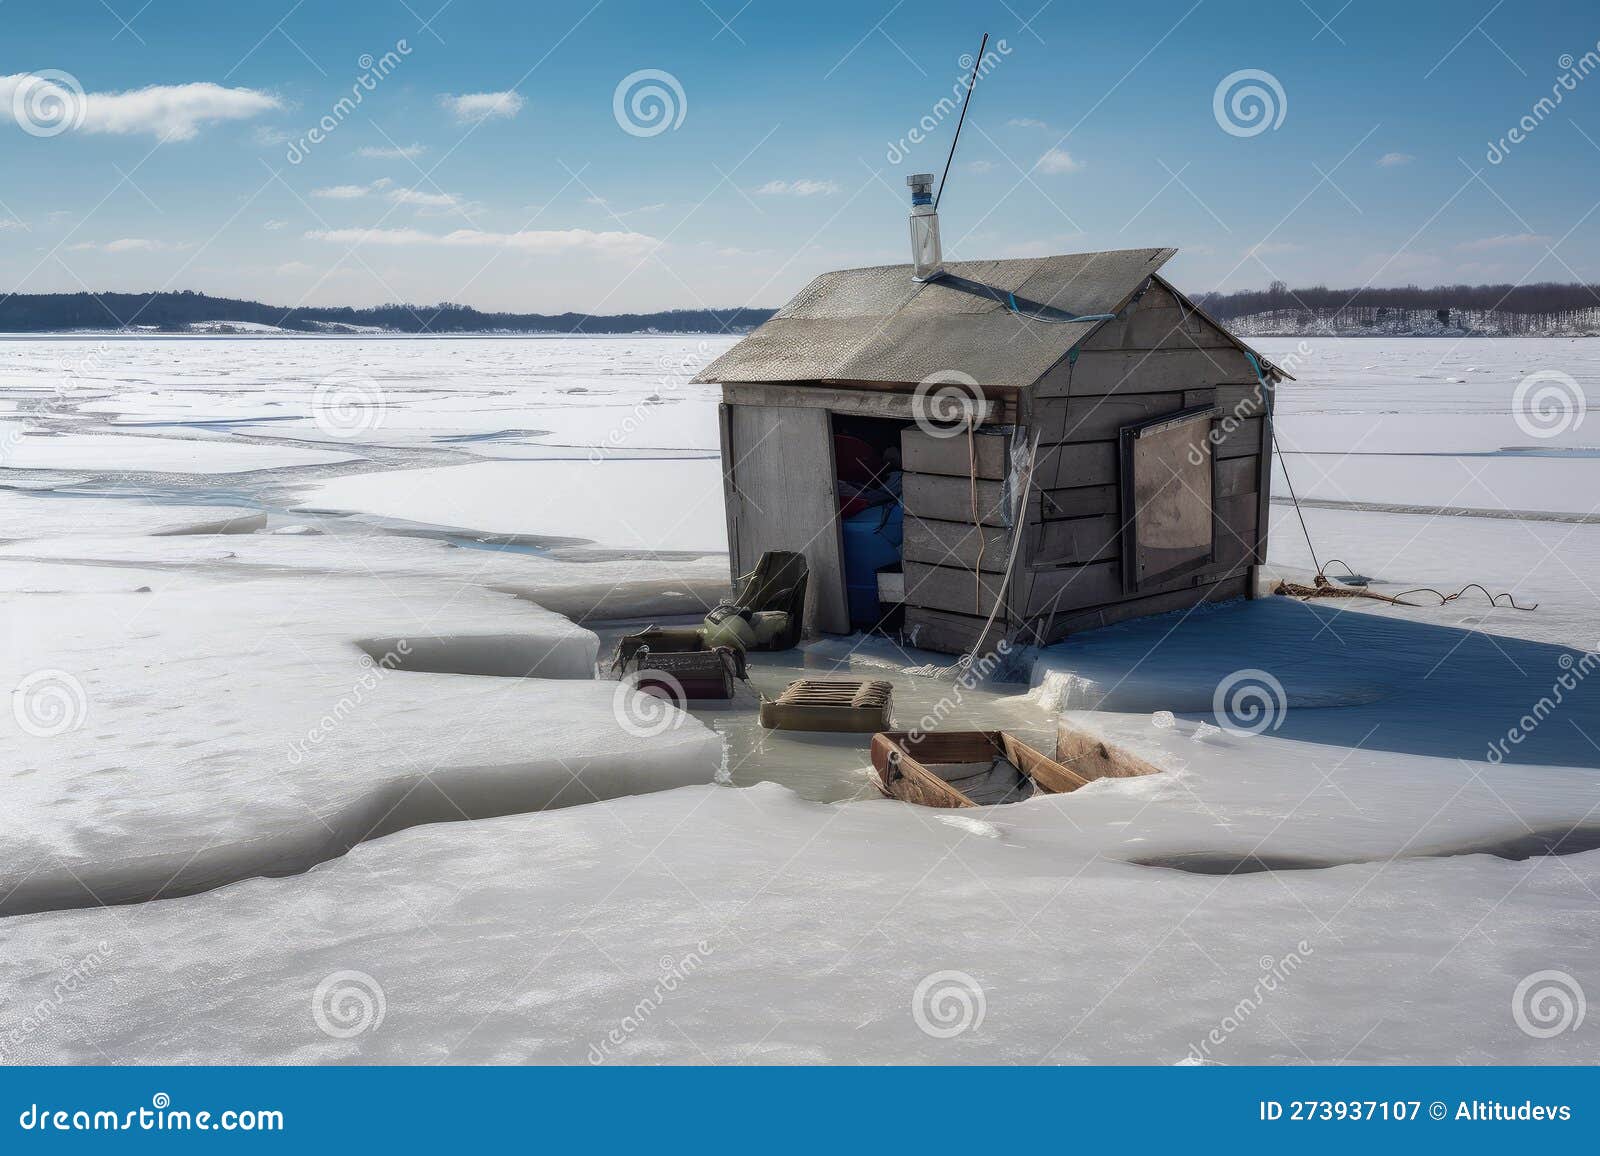 Ice Fishing Hut in Frozen River, with Lines and Tackle Ready for the Catch  Stock Illustration - Illustration of fisherman, generative: 273937107